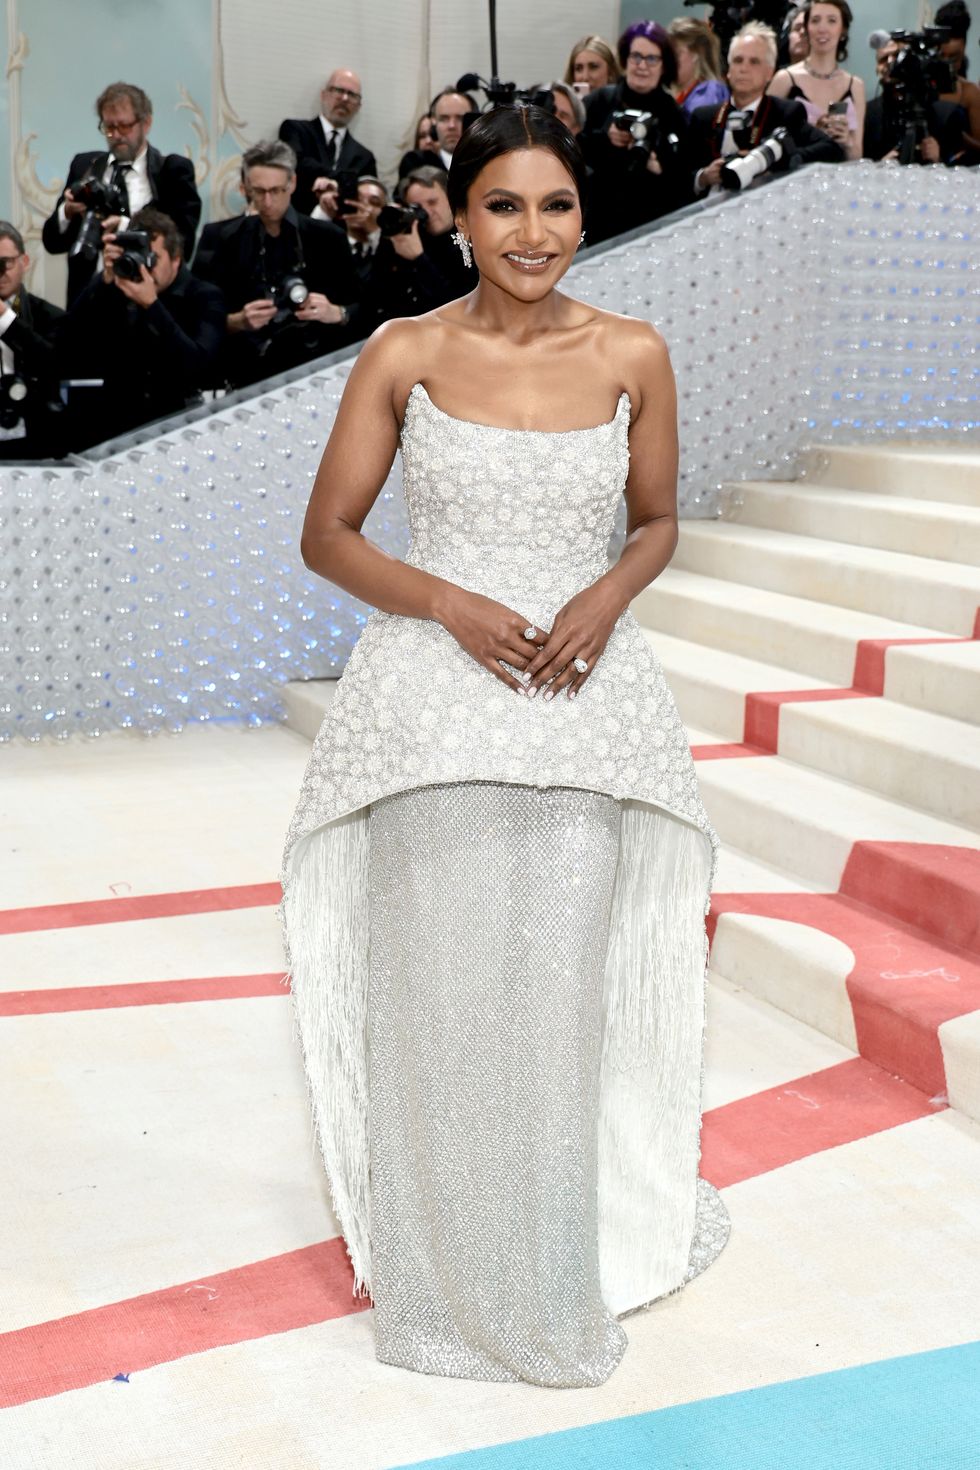 Mindy Kaling Looks Stunning in a Corseted Dress at Met Gala 2023